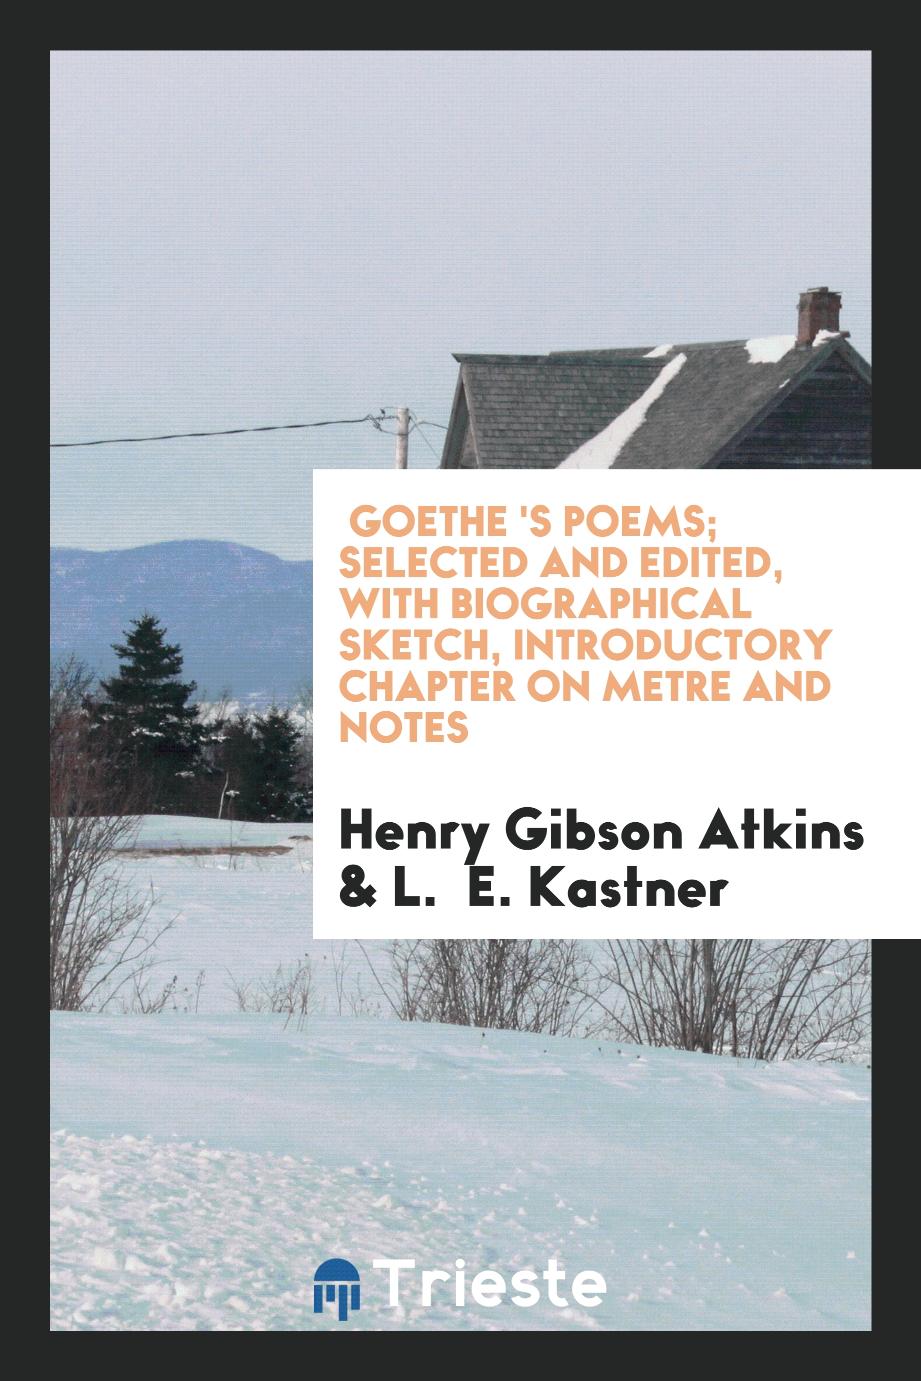 Goethe 's Poems; selected and edited, with biographical sketch, introductory chapter on metre and notes